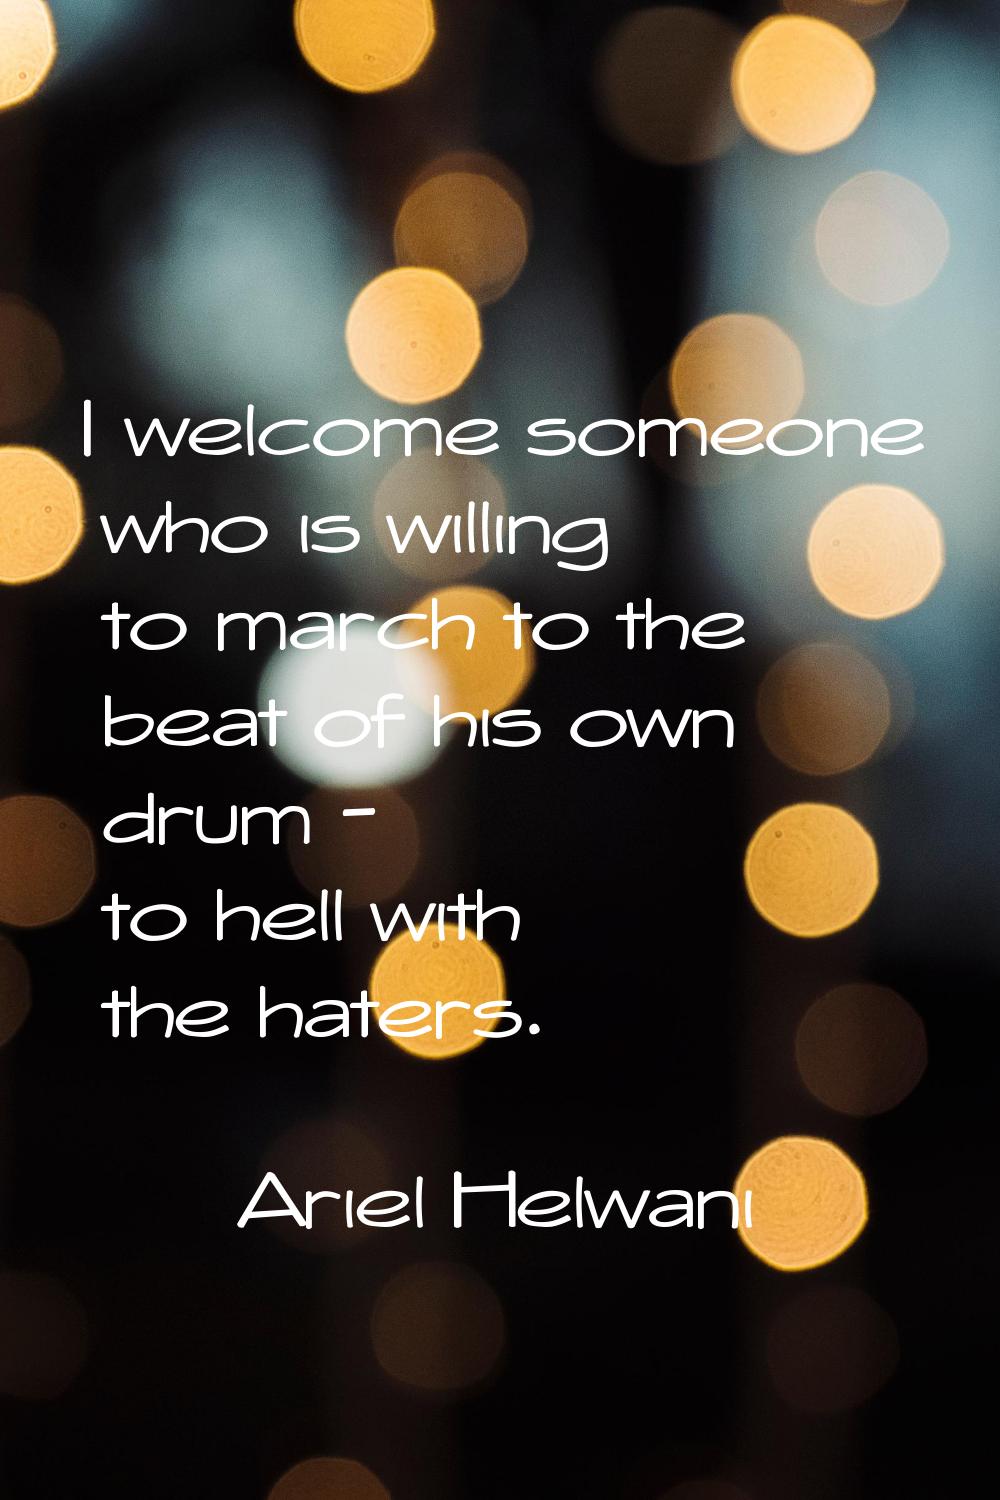 I welcome someone who is willing to march to the beat of his own drum - to hell with the haters.